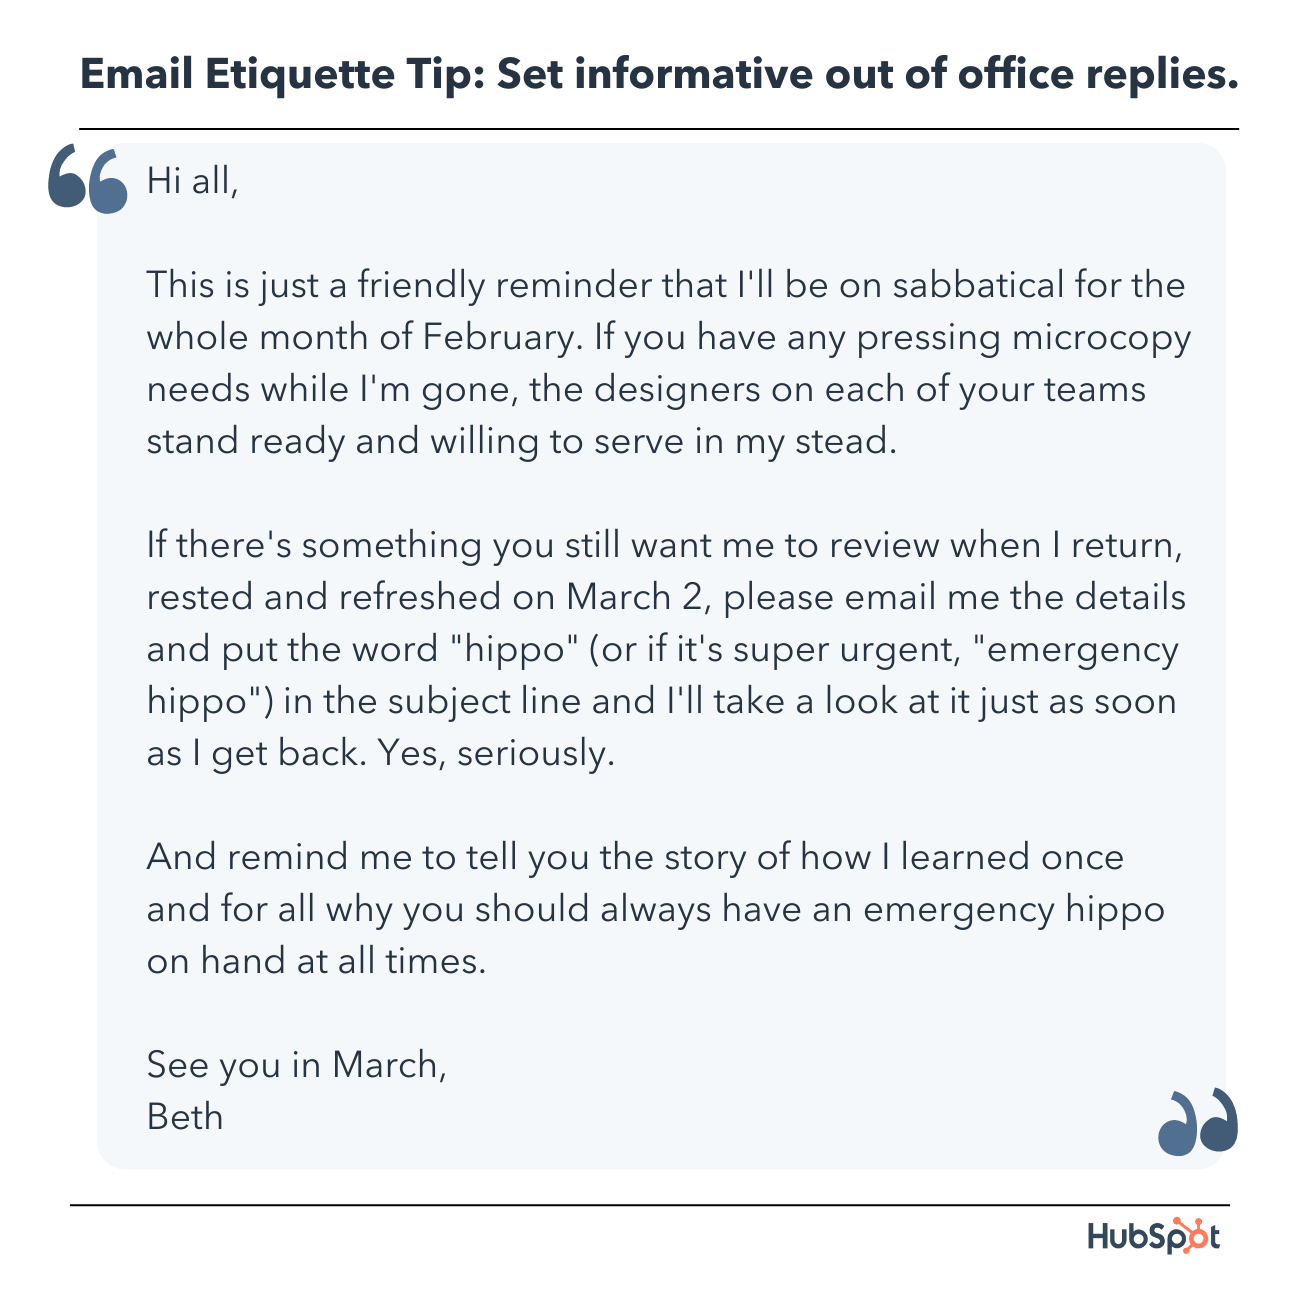 email etiquette tip: set informal out of office replies